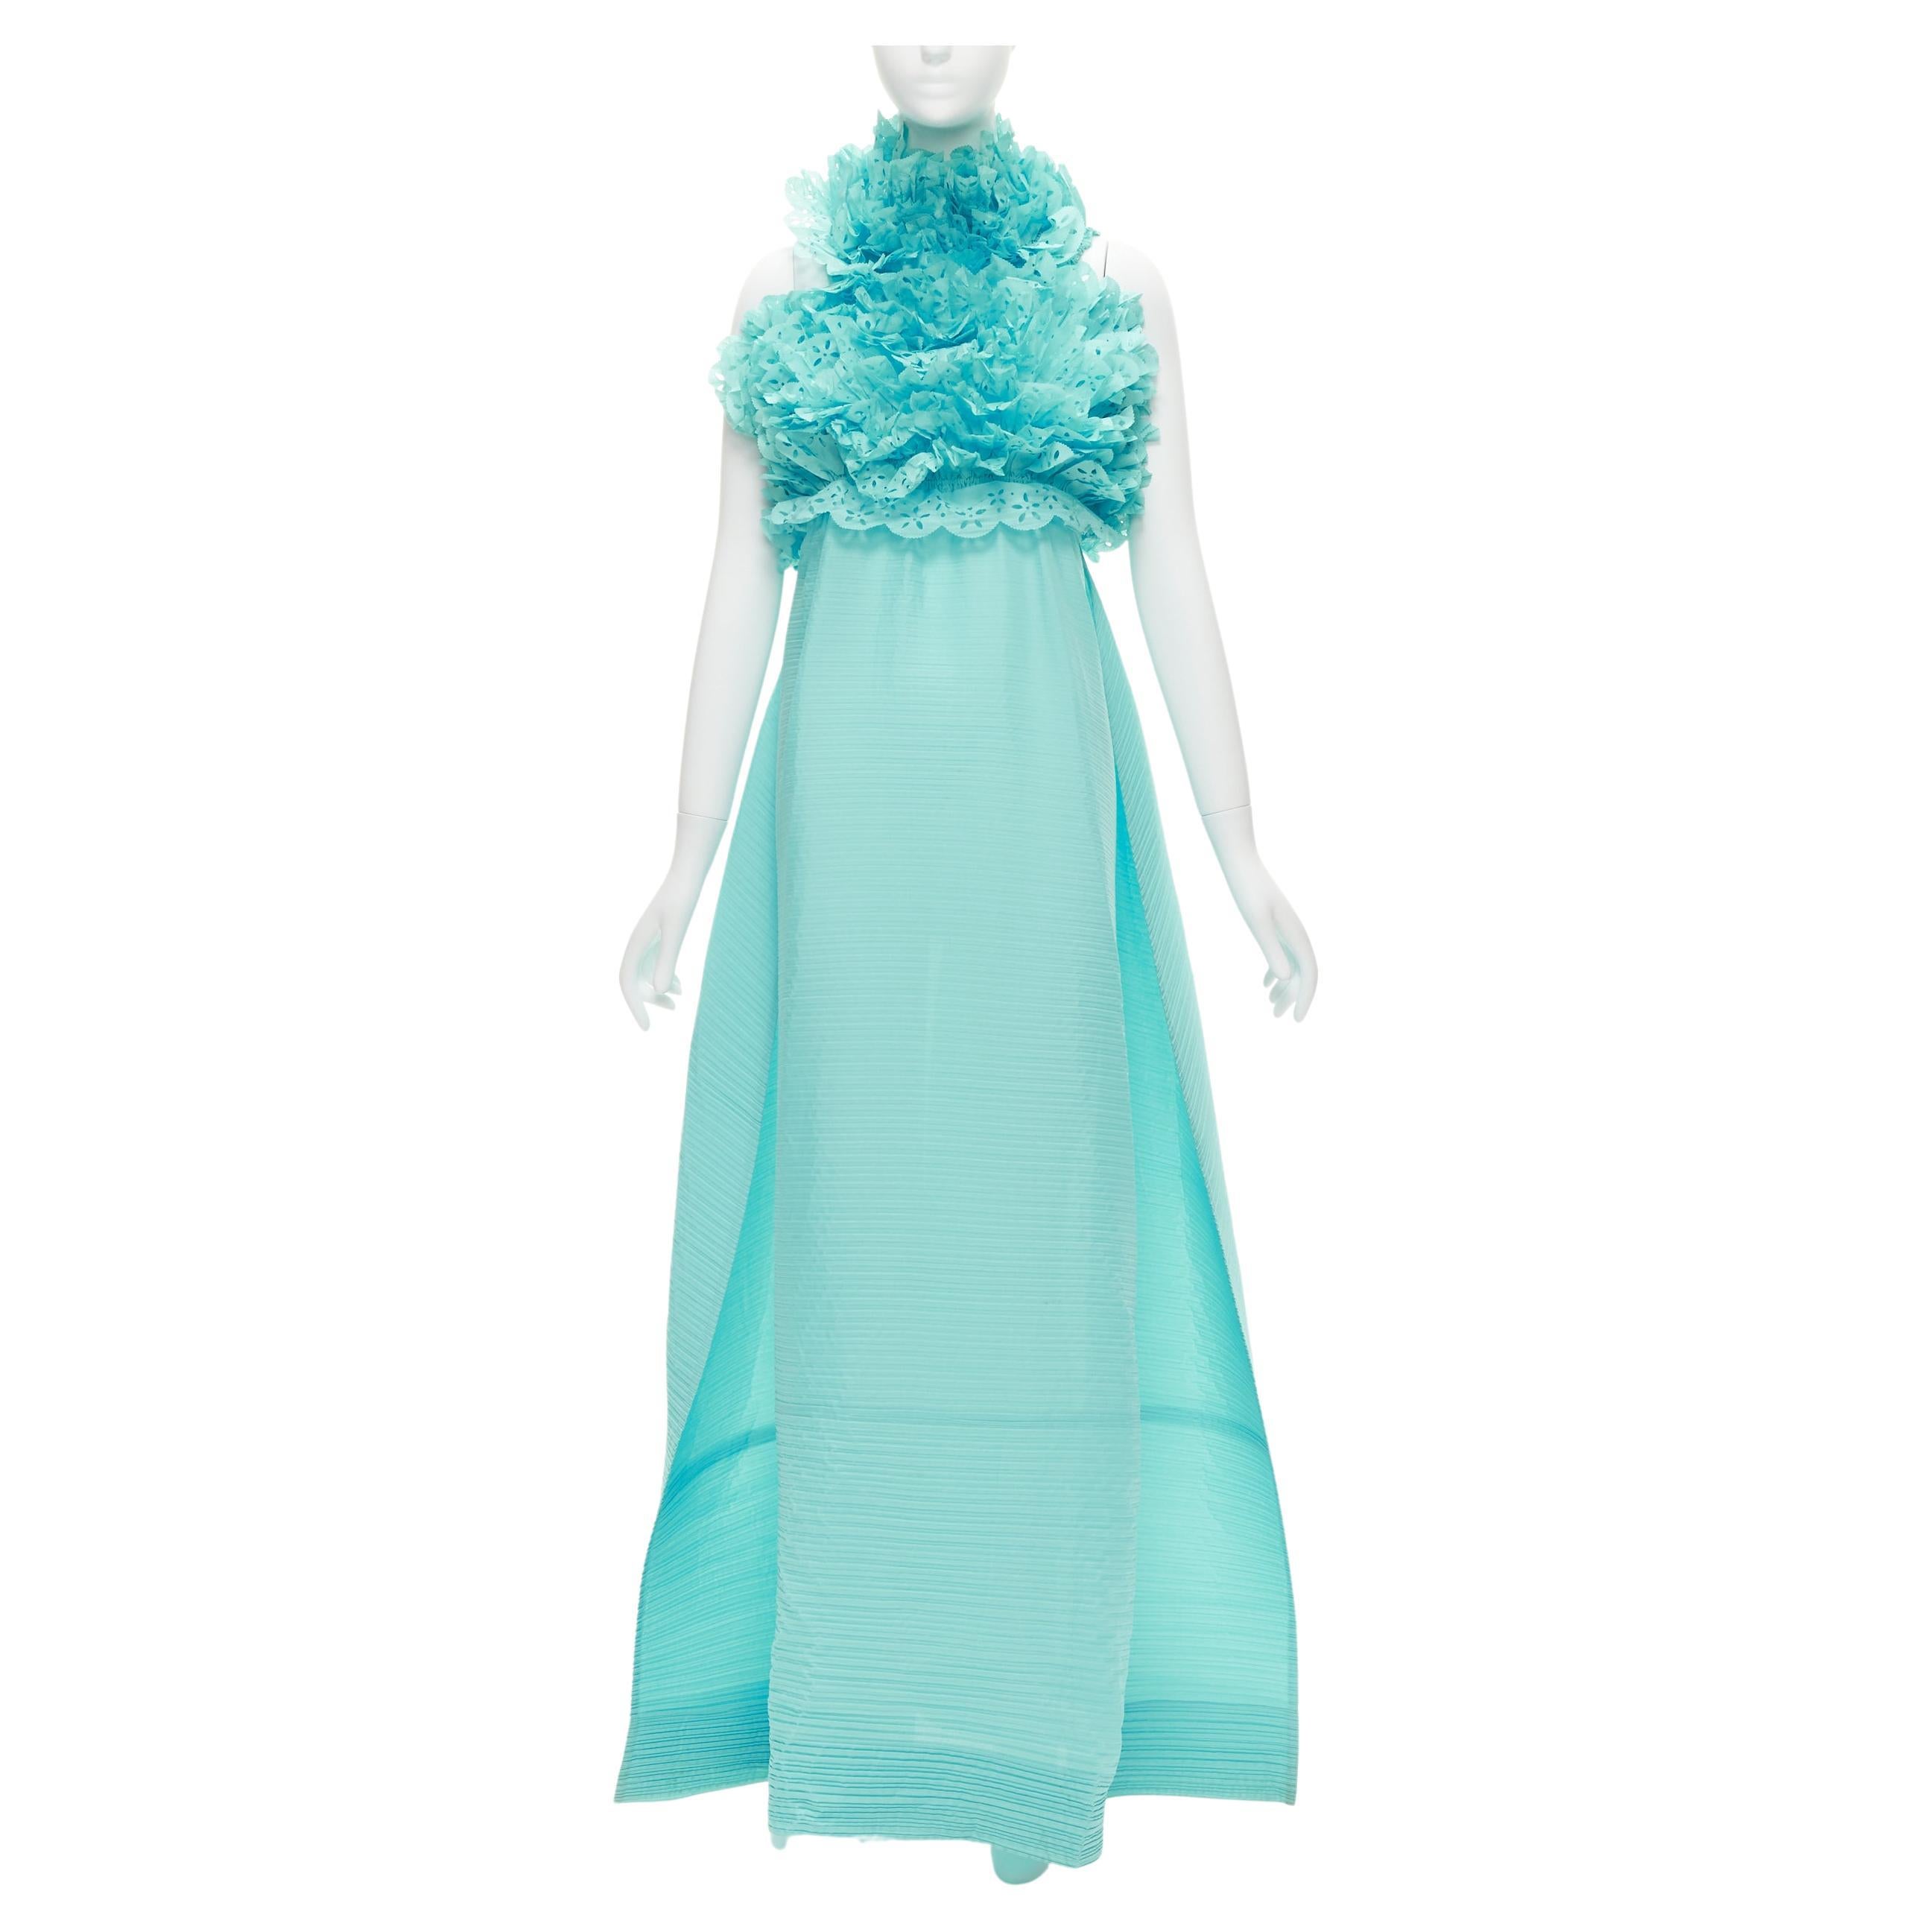 rare ISSEY MIYAKE sky blue laser cut ruffle high neck evening gown dress M For Sale